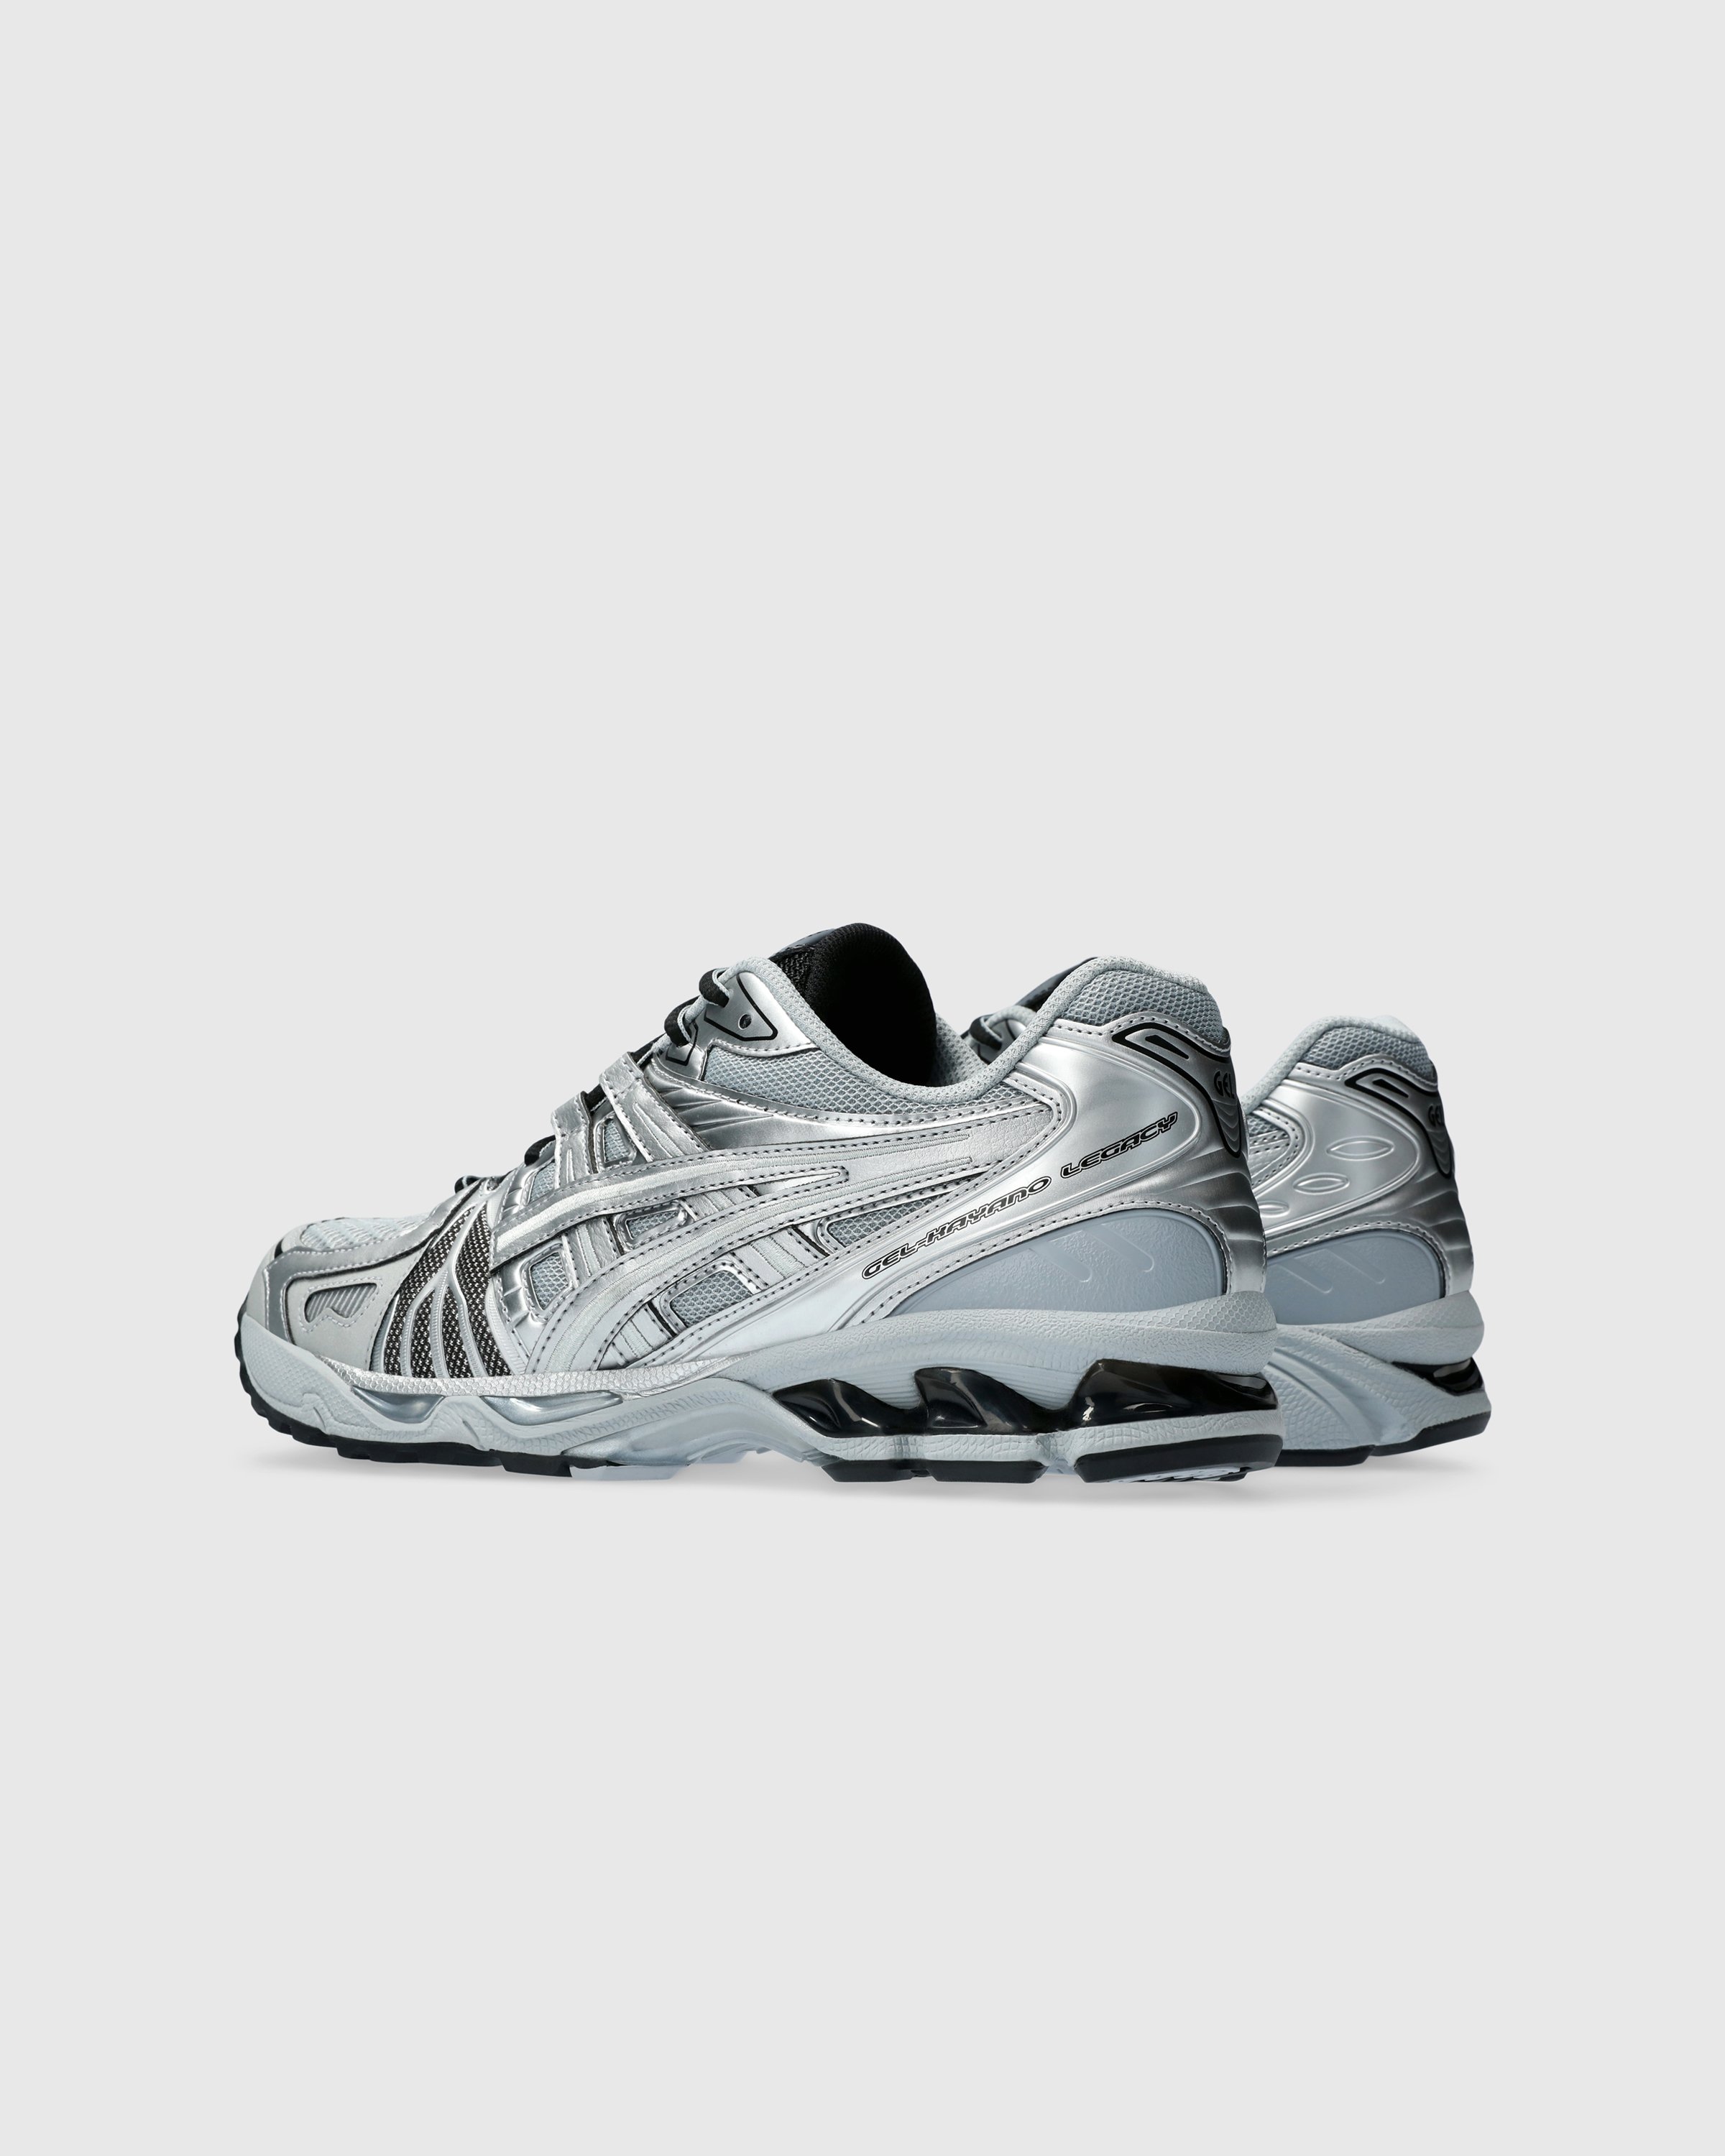 asics - GEL-KAYANO 14 Pure Silver/Pure Silver - Footwear - Silver - Image 4